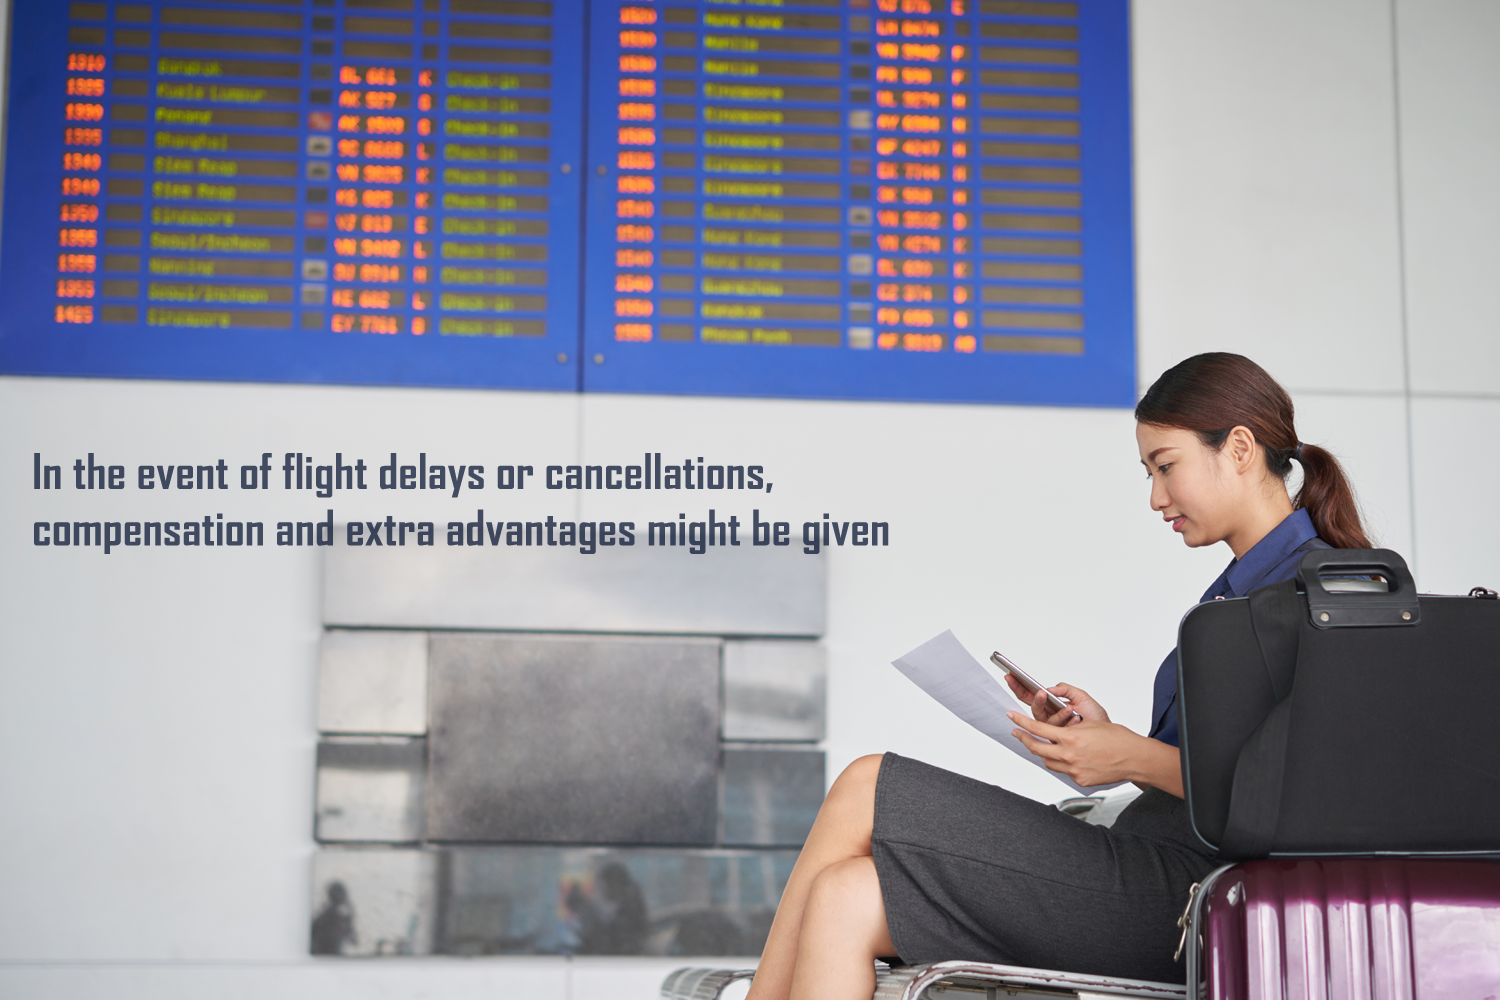 In the event of flight delays or cancellations, compensation and extra advantages might be given